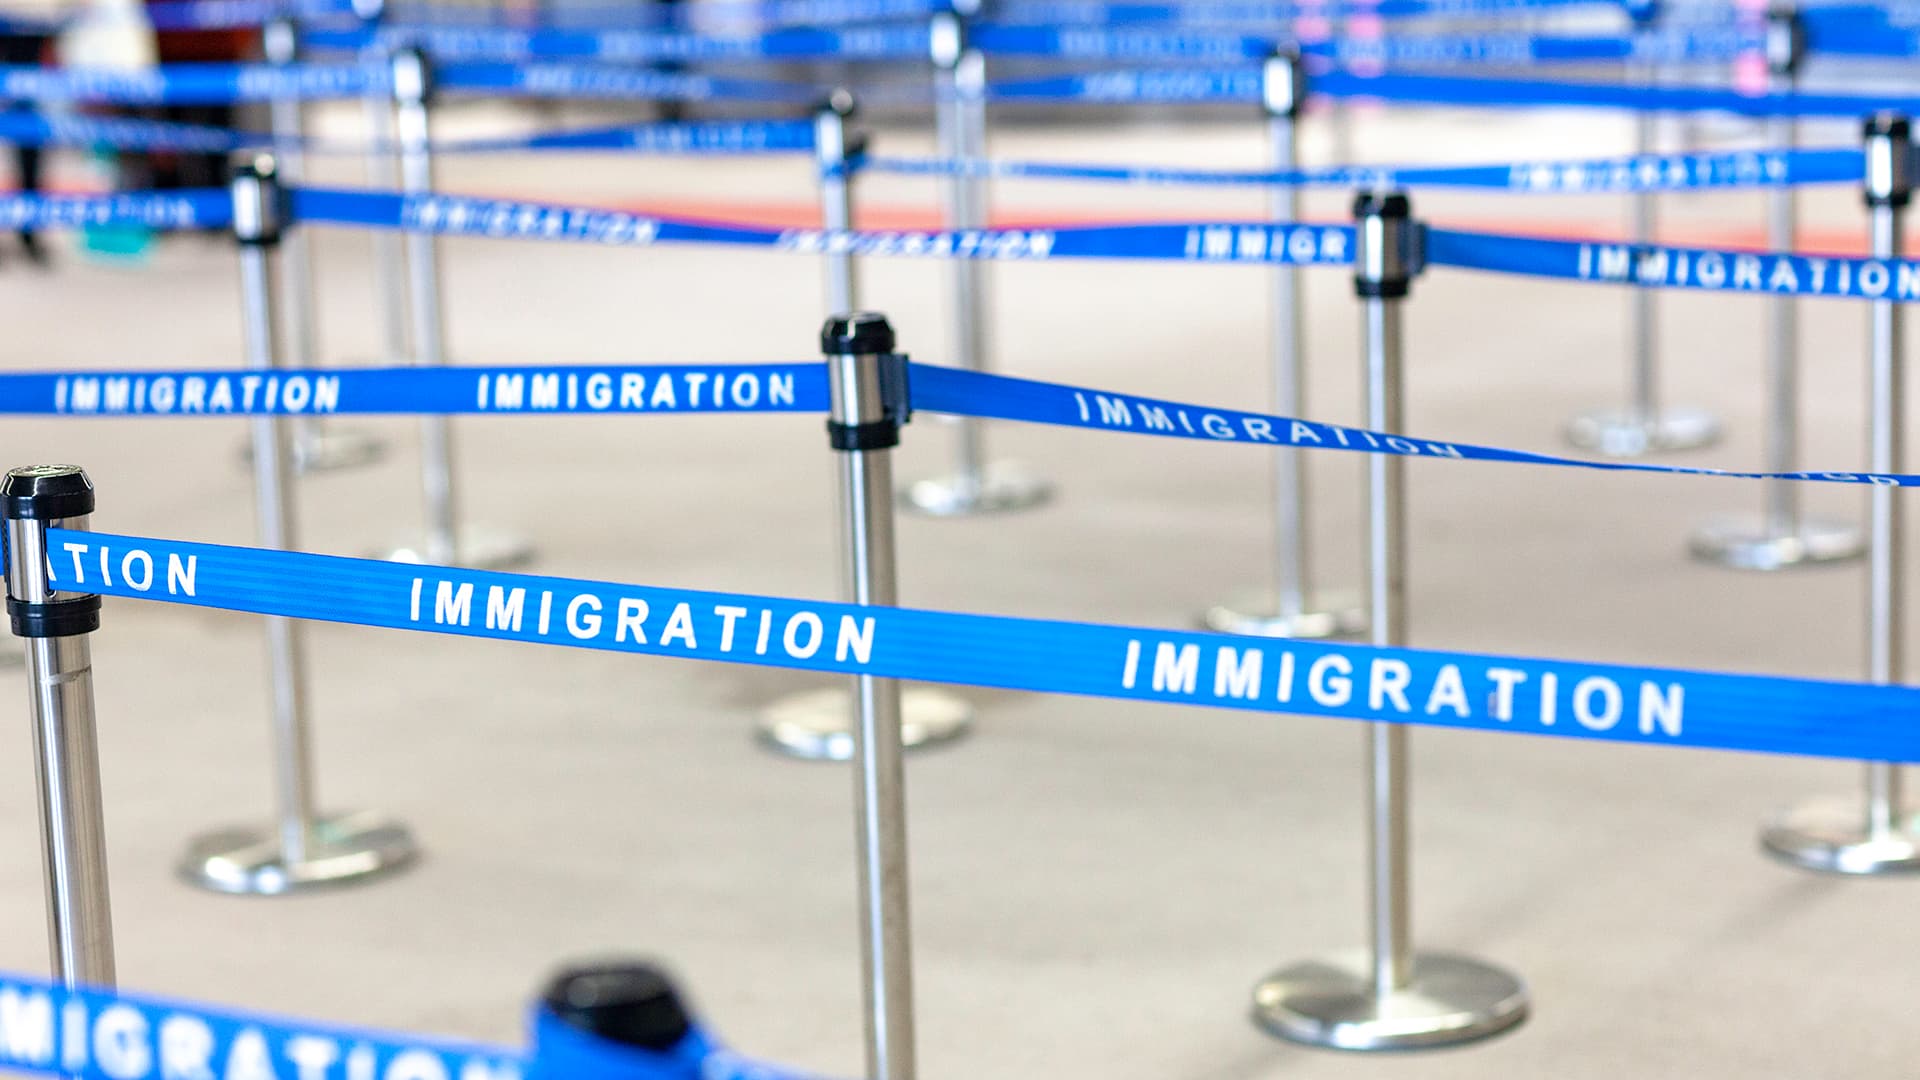 Line barriers with "immigration" written on them